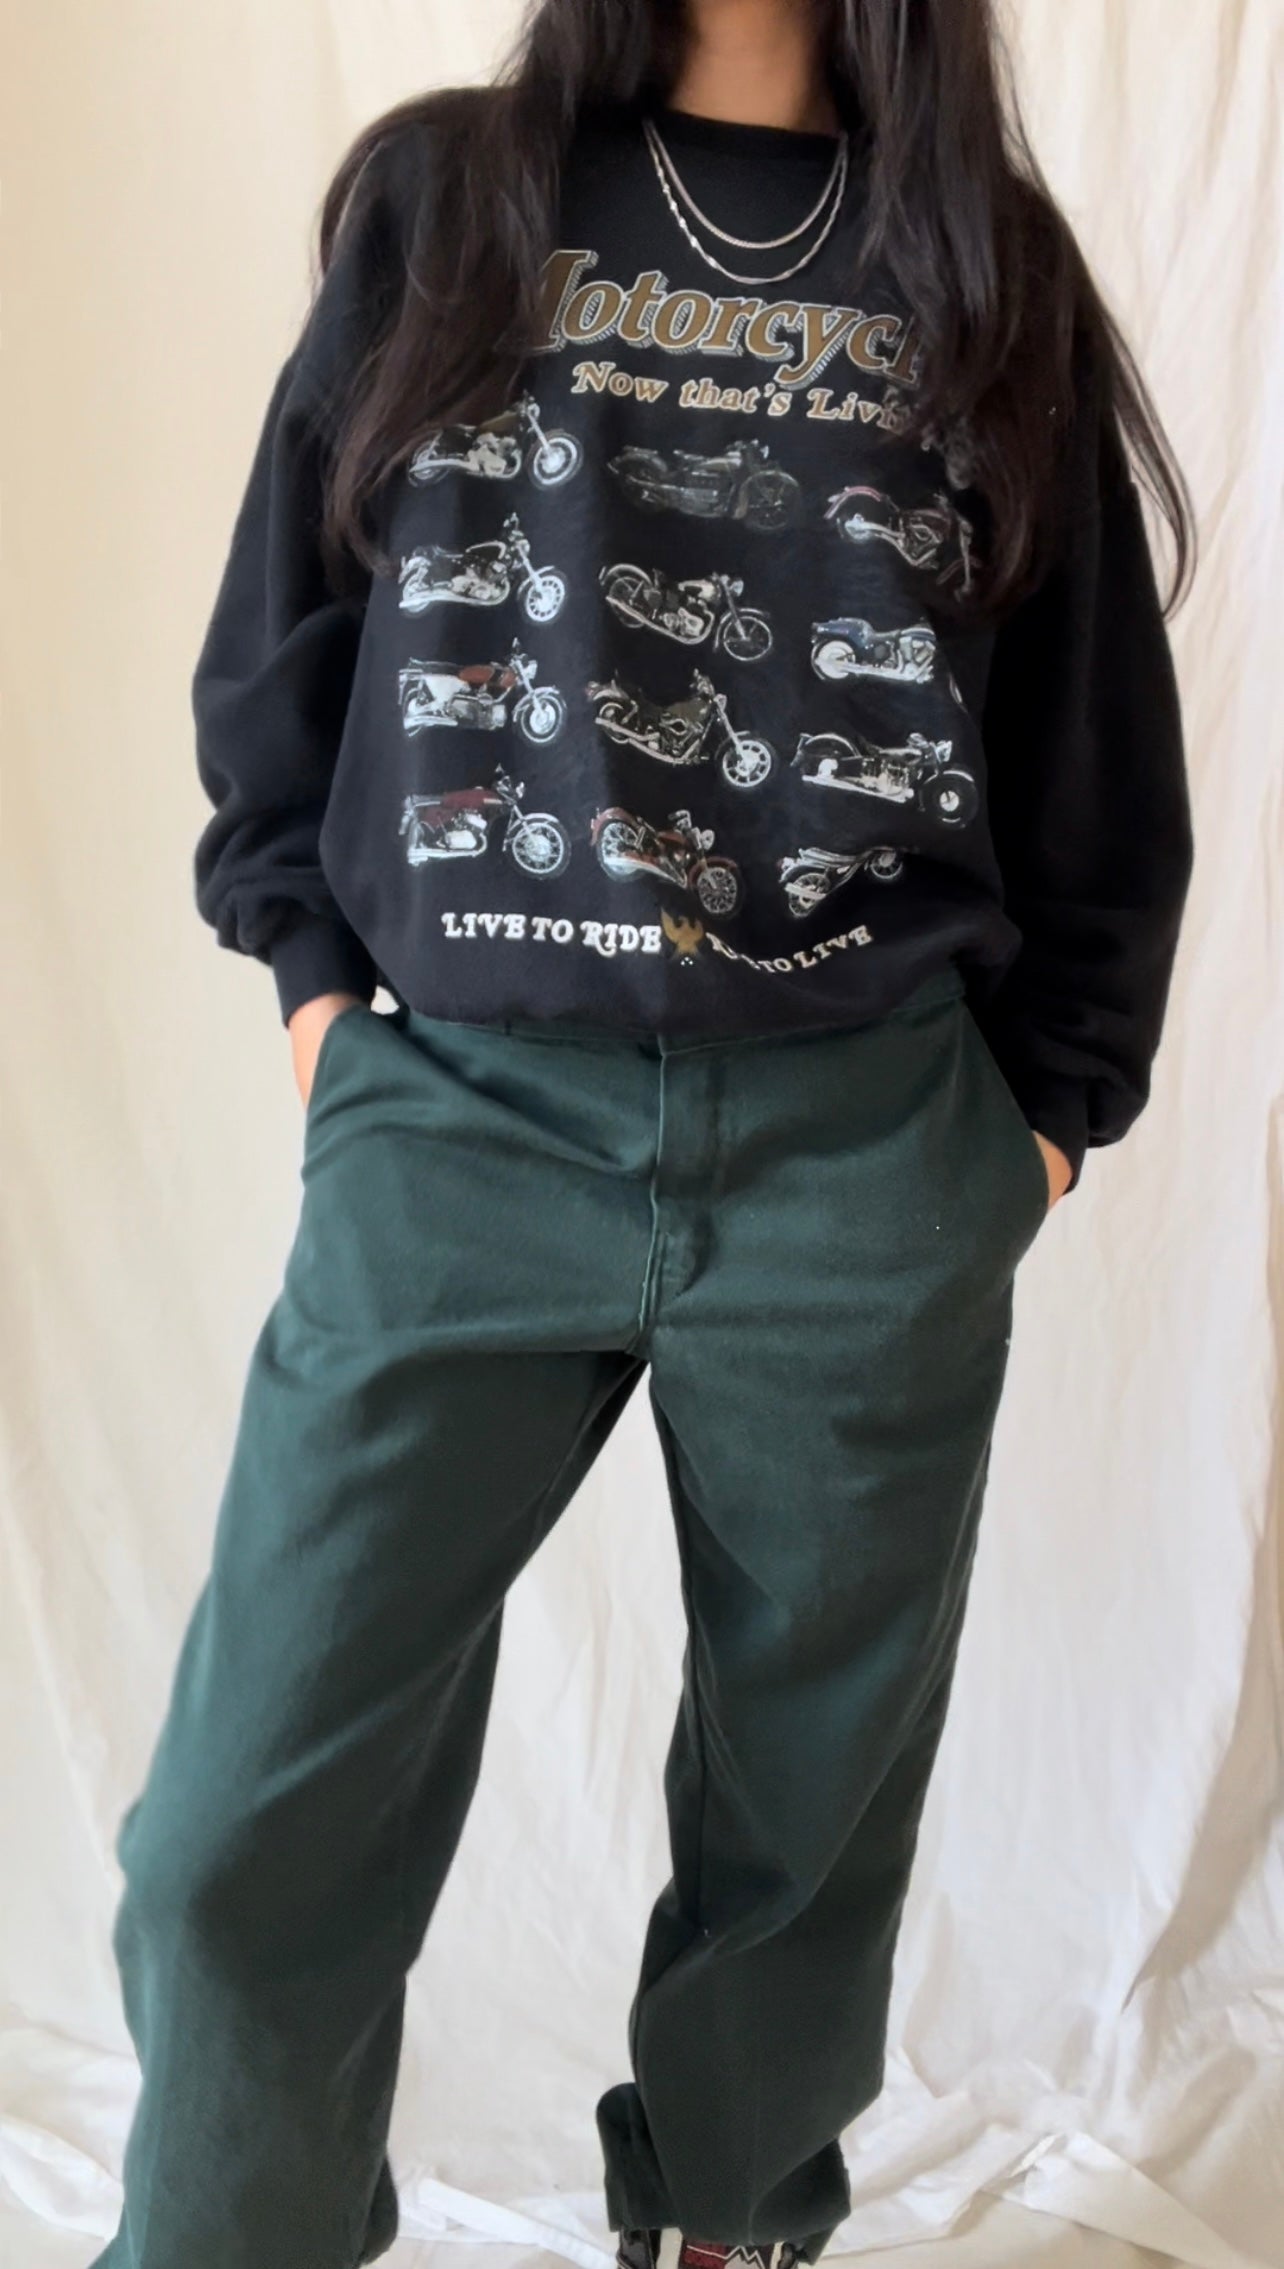 Motorcycles Pullover Sweater